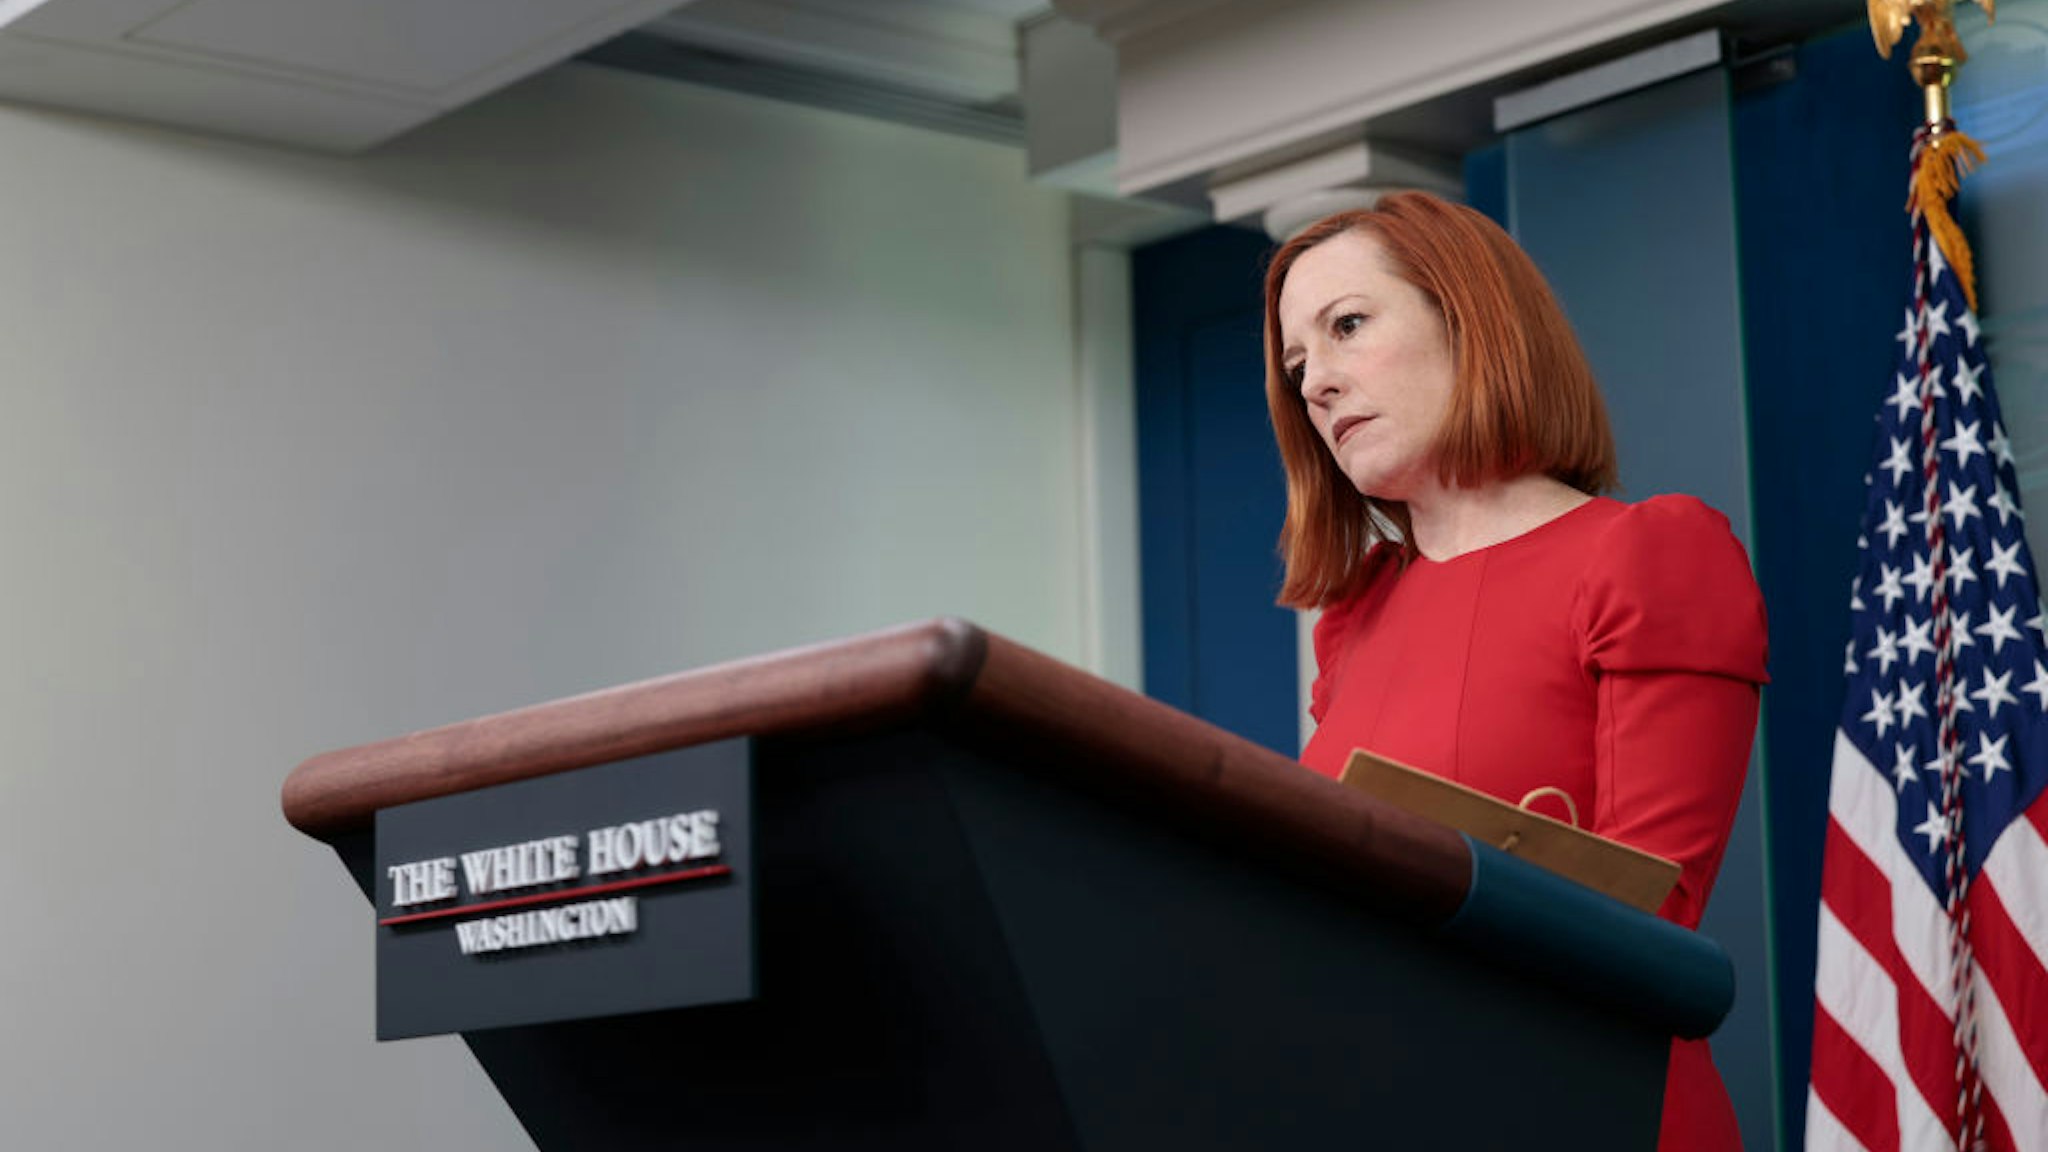 WASHINGTON, DC - MARCH 03: White House press secretary Jen Psaki speaks during the daily press briefing in the James Brady Press Briefing Room on March 03, 2022 in Washington, DC. Psaki took questions about U.S. President Joe Biden's secure video call with fellow Quad Leaders and the comments House Speaker Nancy Pelosi (D-CA) made about banning the import of Russian oil. (Photo by Anna Moneymaker/Getty Images)